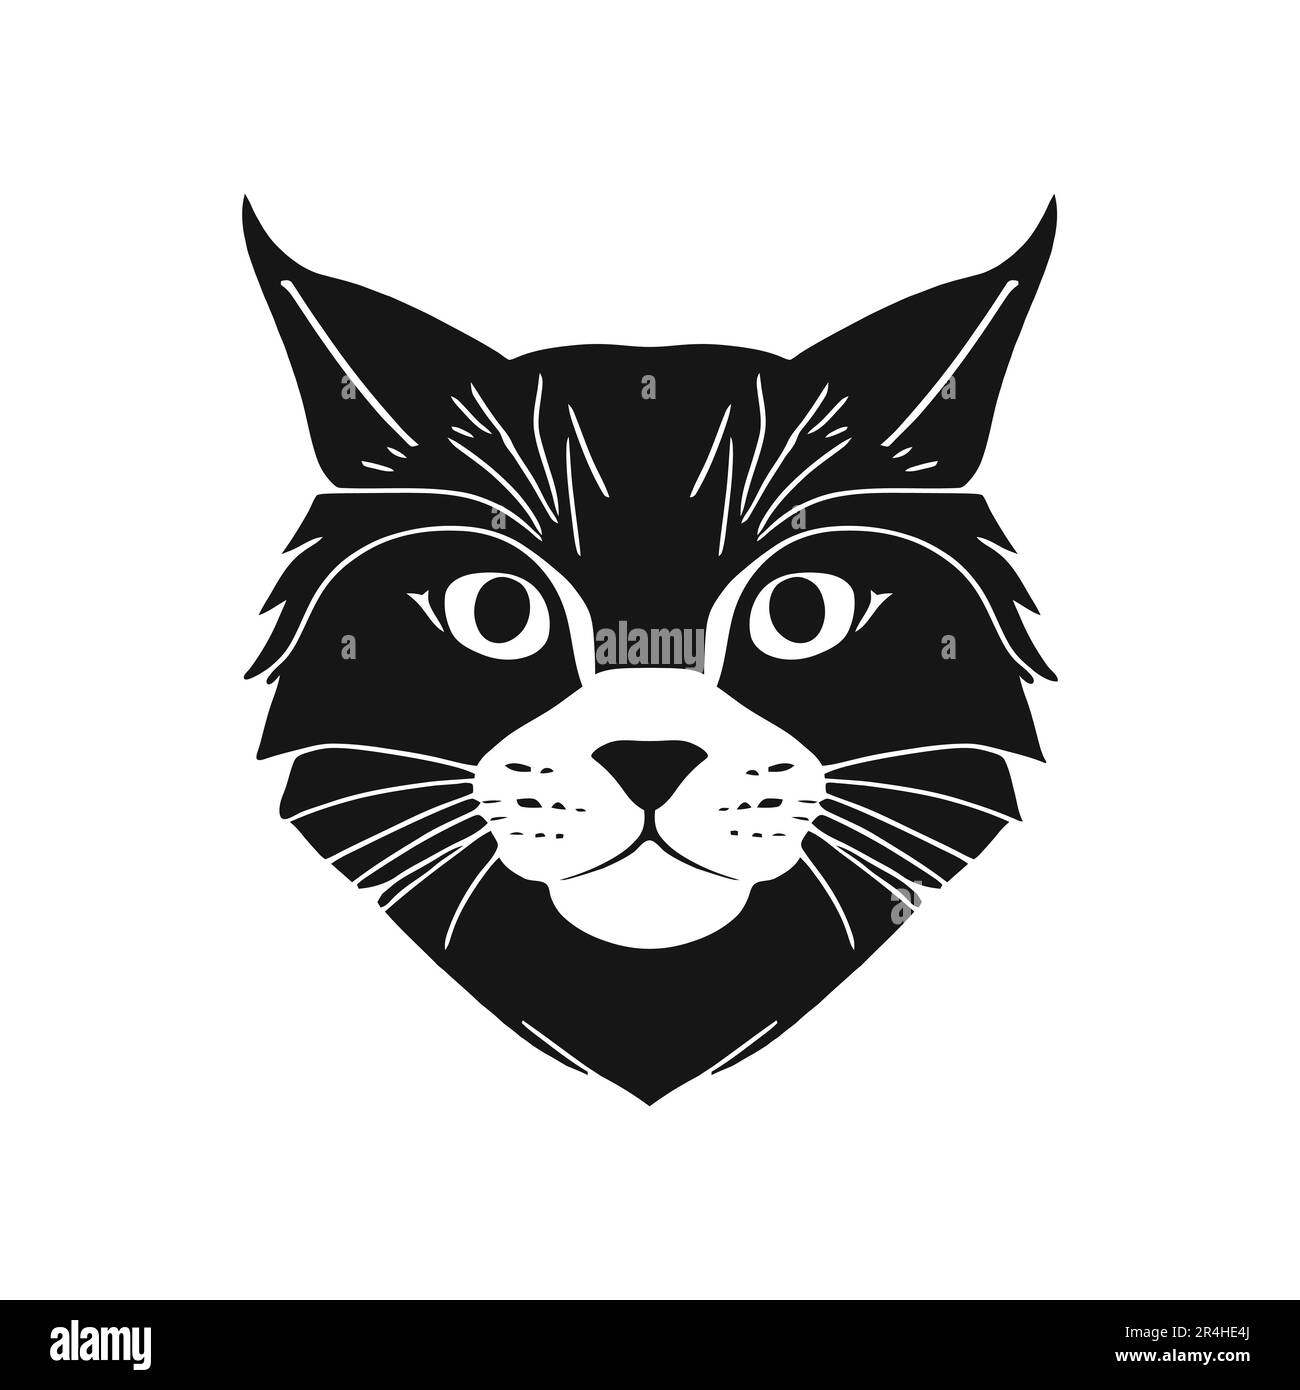 Black Cat Logo or icon stock vector. Illustration of clean - 130733638